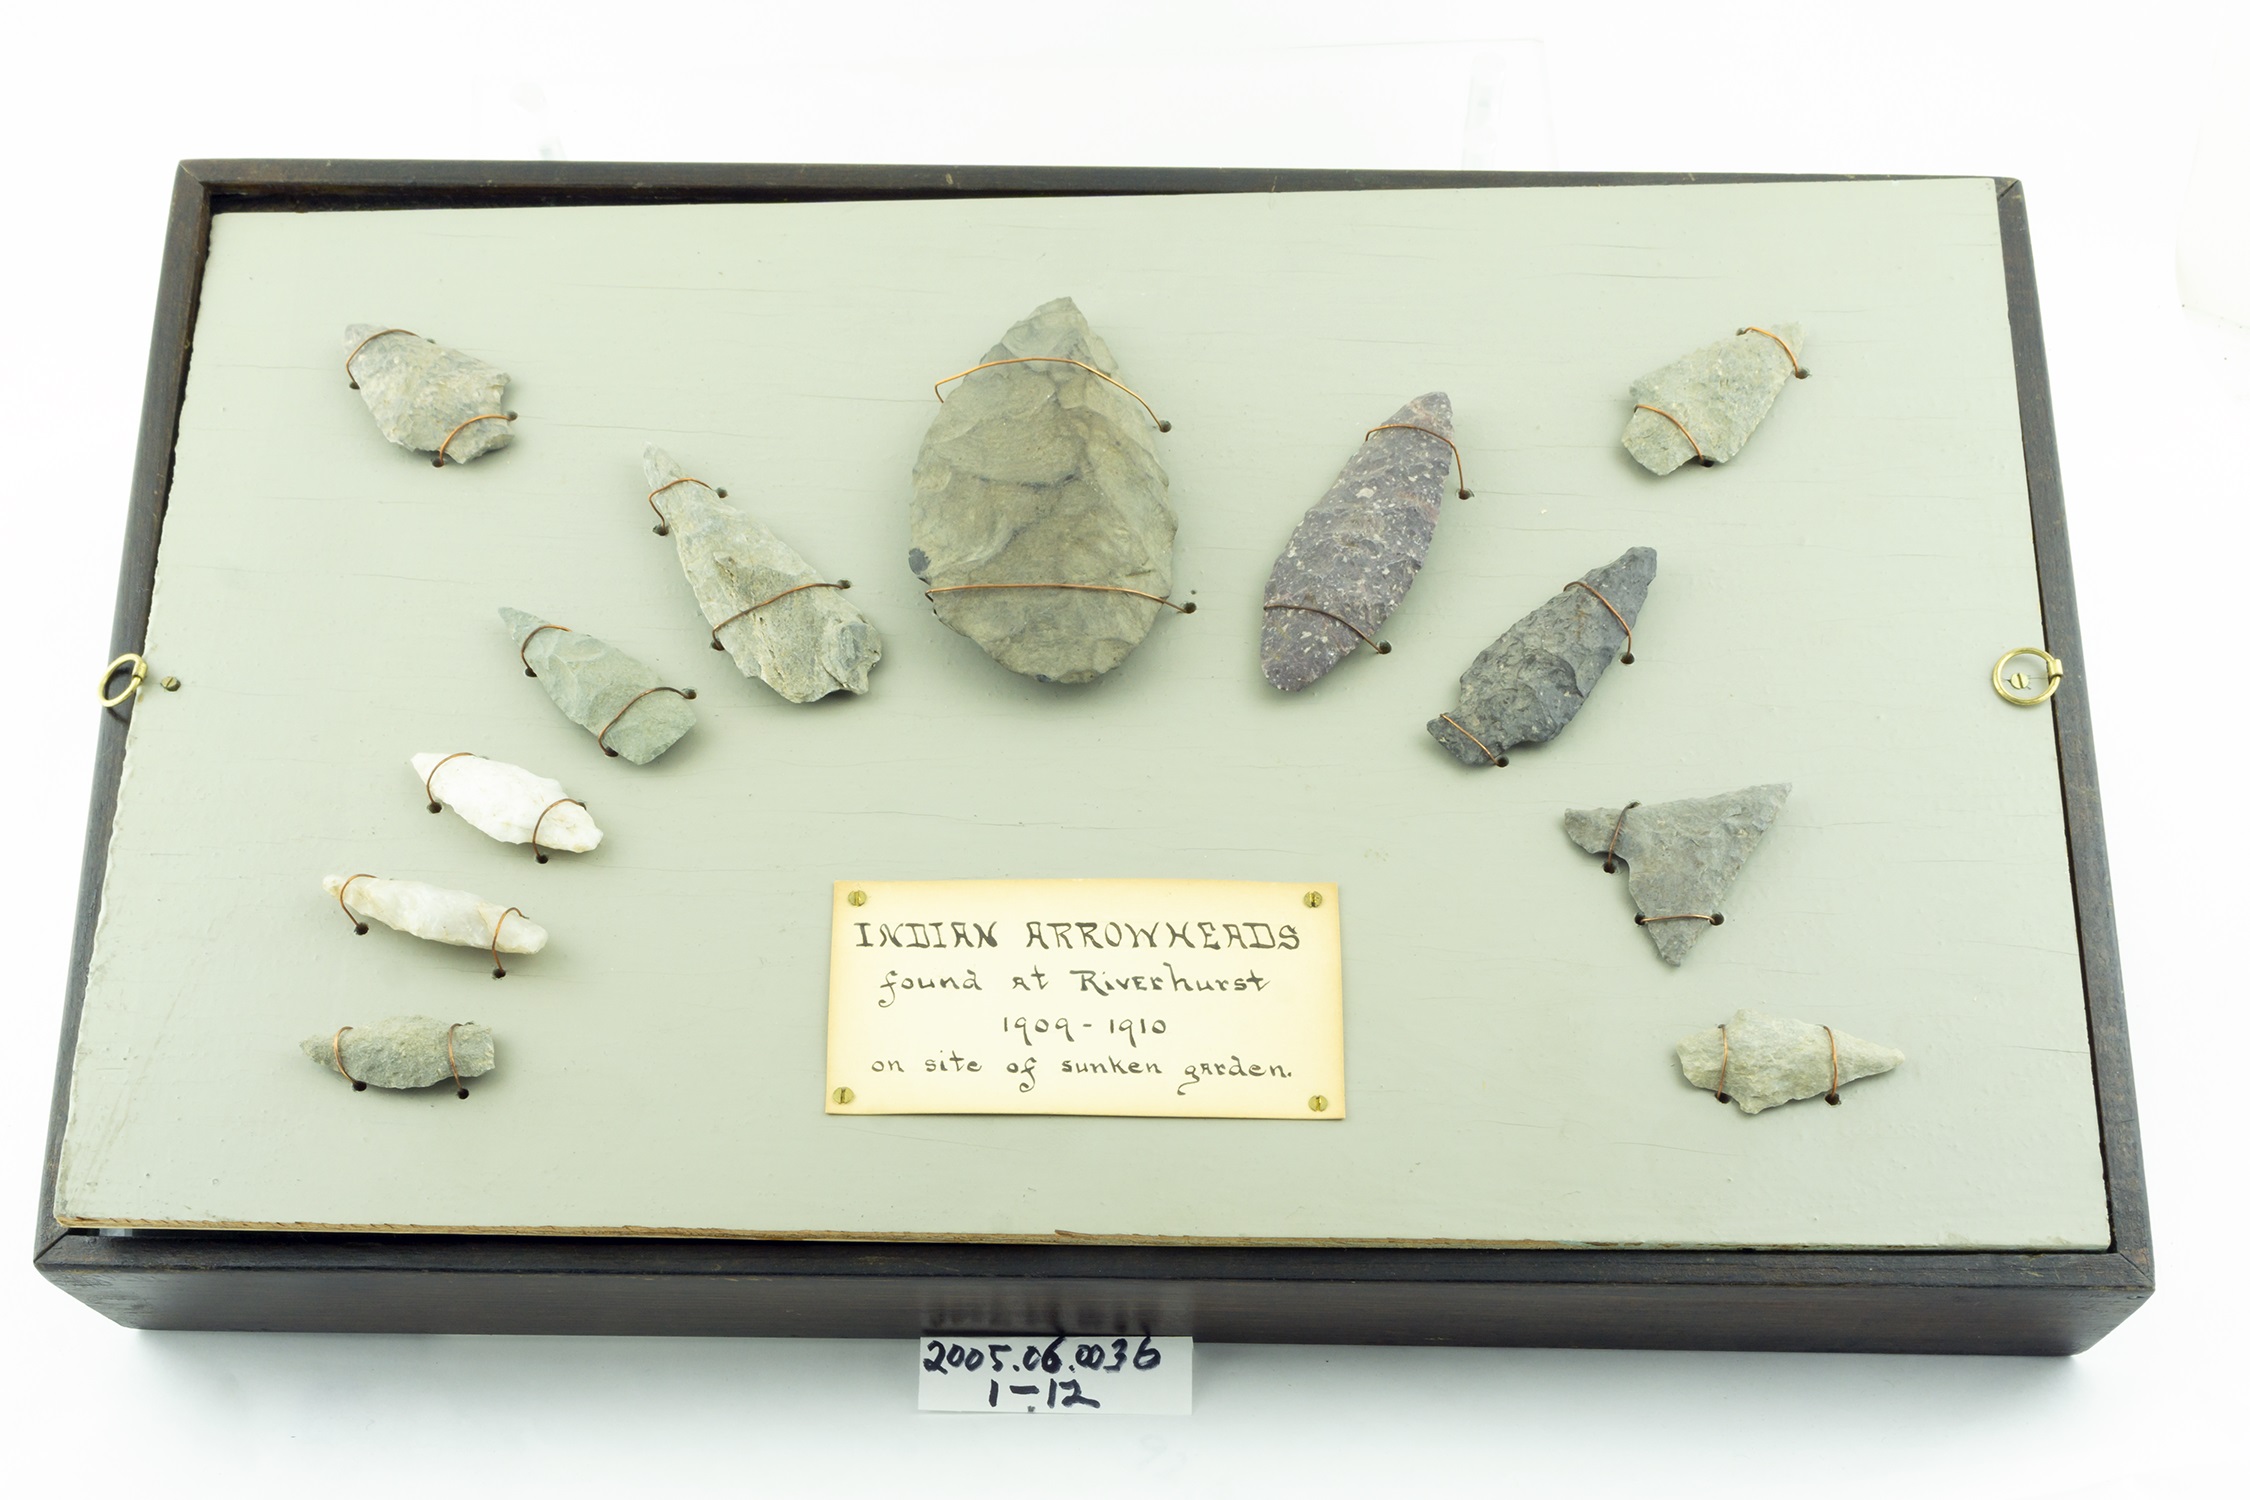 Collection of Native American stone tools collected at Riverhurst, Kennebunk.